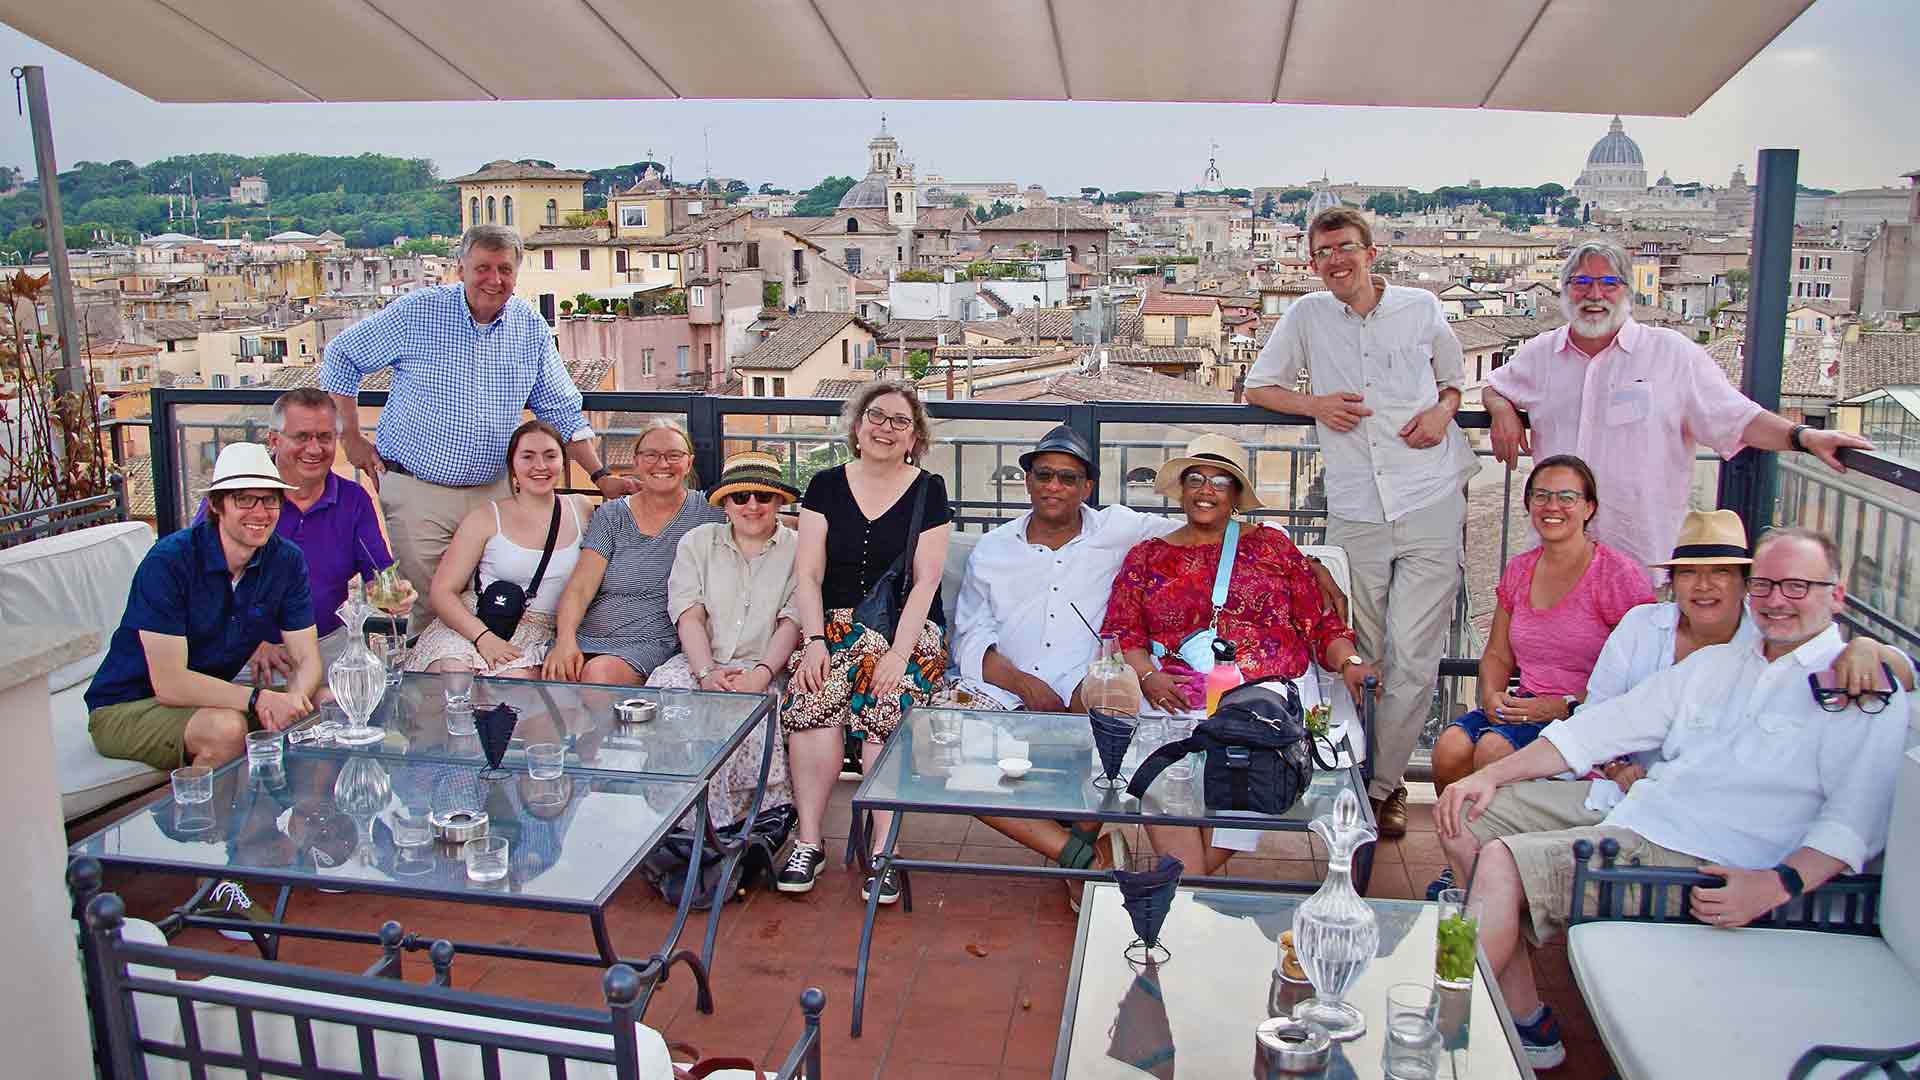 St. Thomas Staff and Faculty pose for photo in Rome